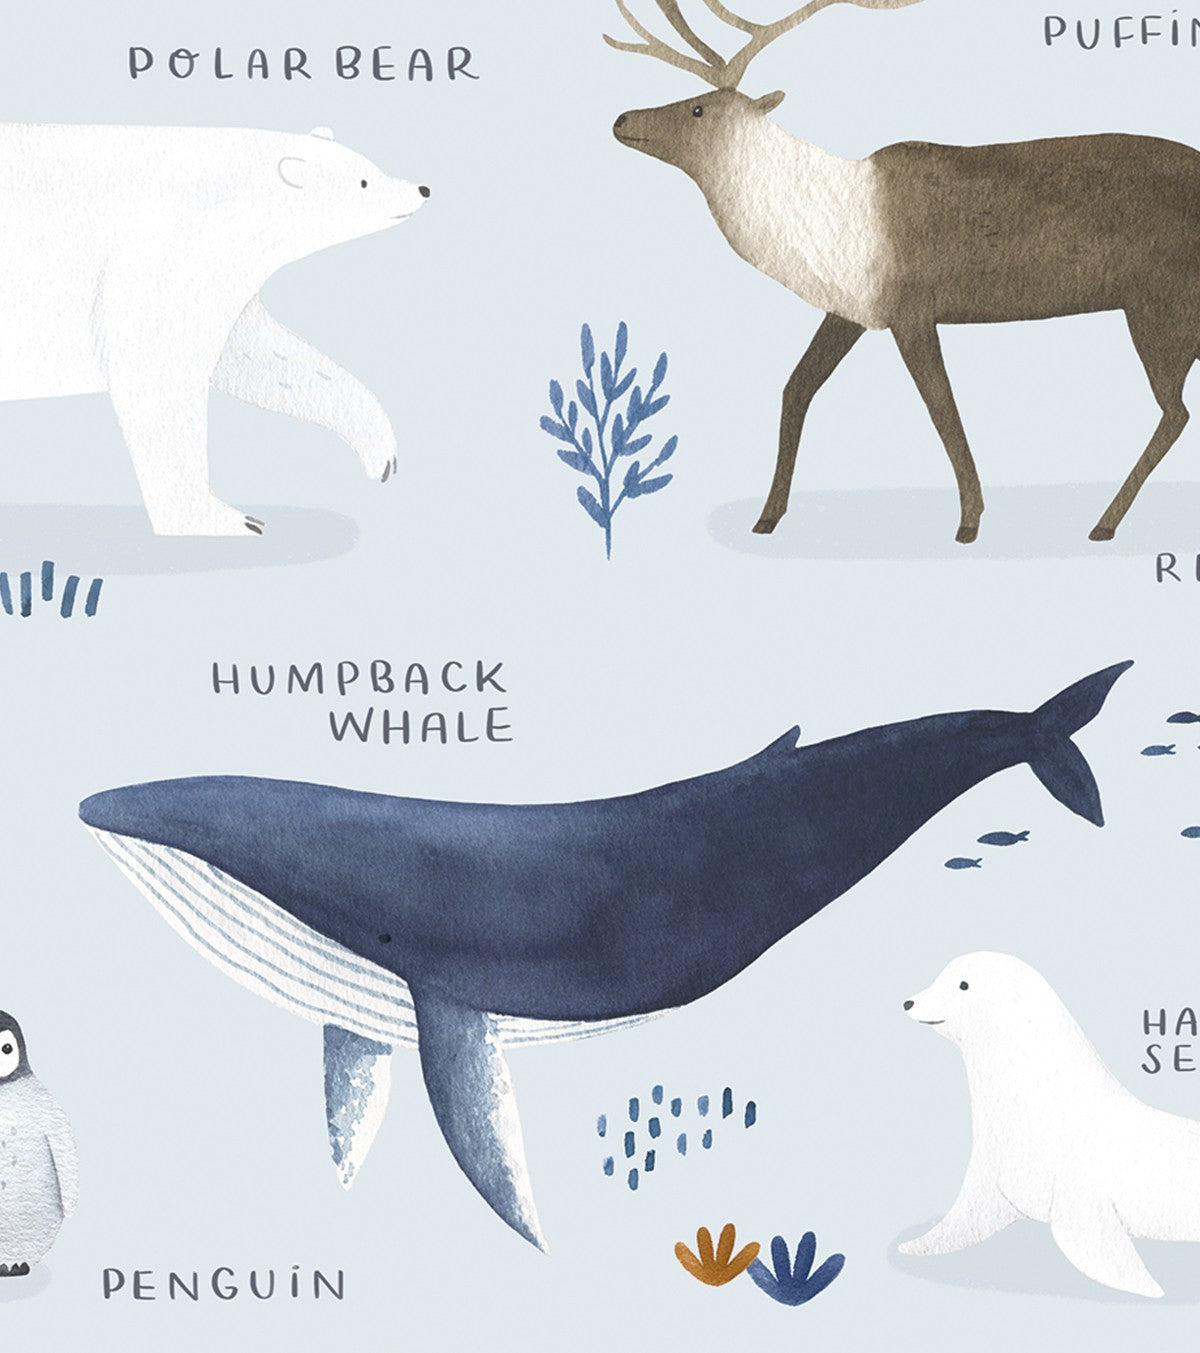 Living Earth - Children's Poster - North And South Pole Animals